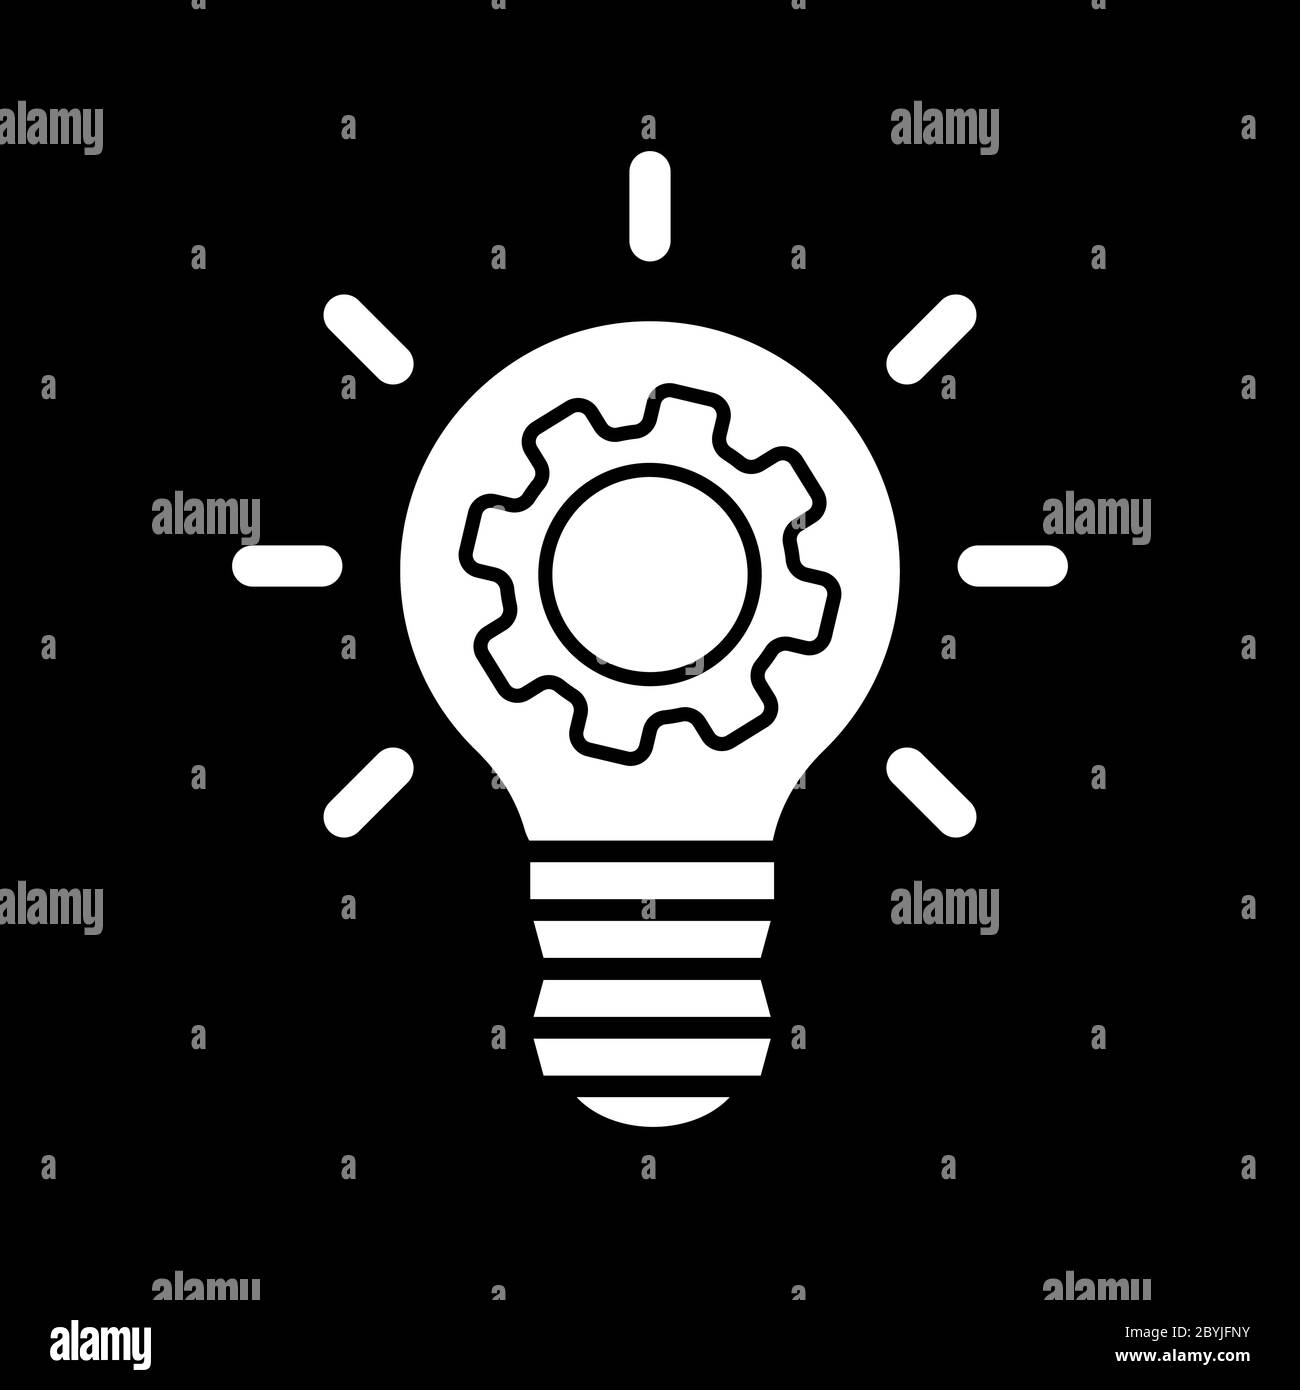 Light bulb idea icon with gears inside in white on an isolated black background. Business concept. EPS 10 vector Stock Vector